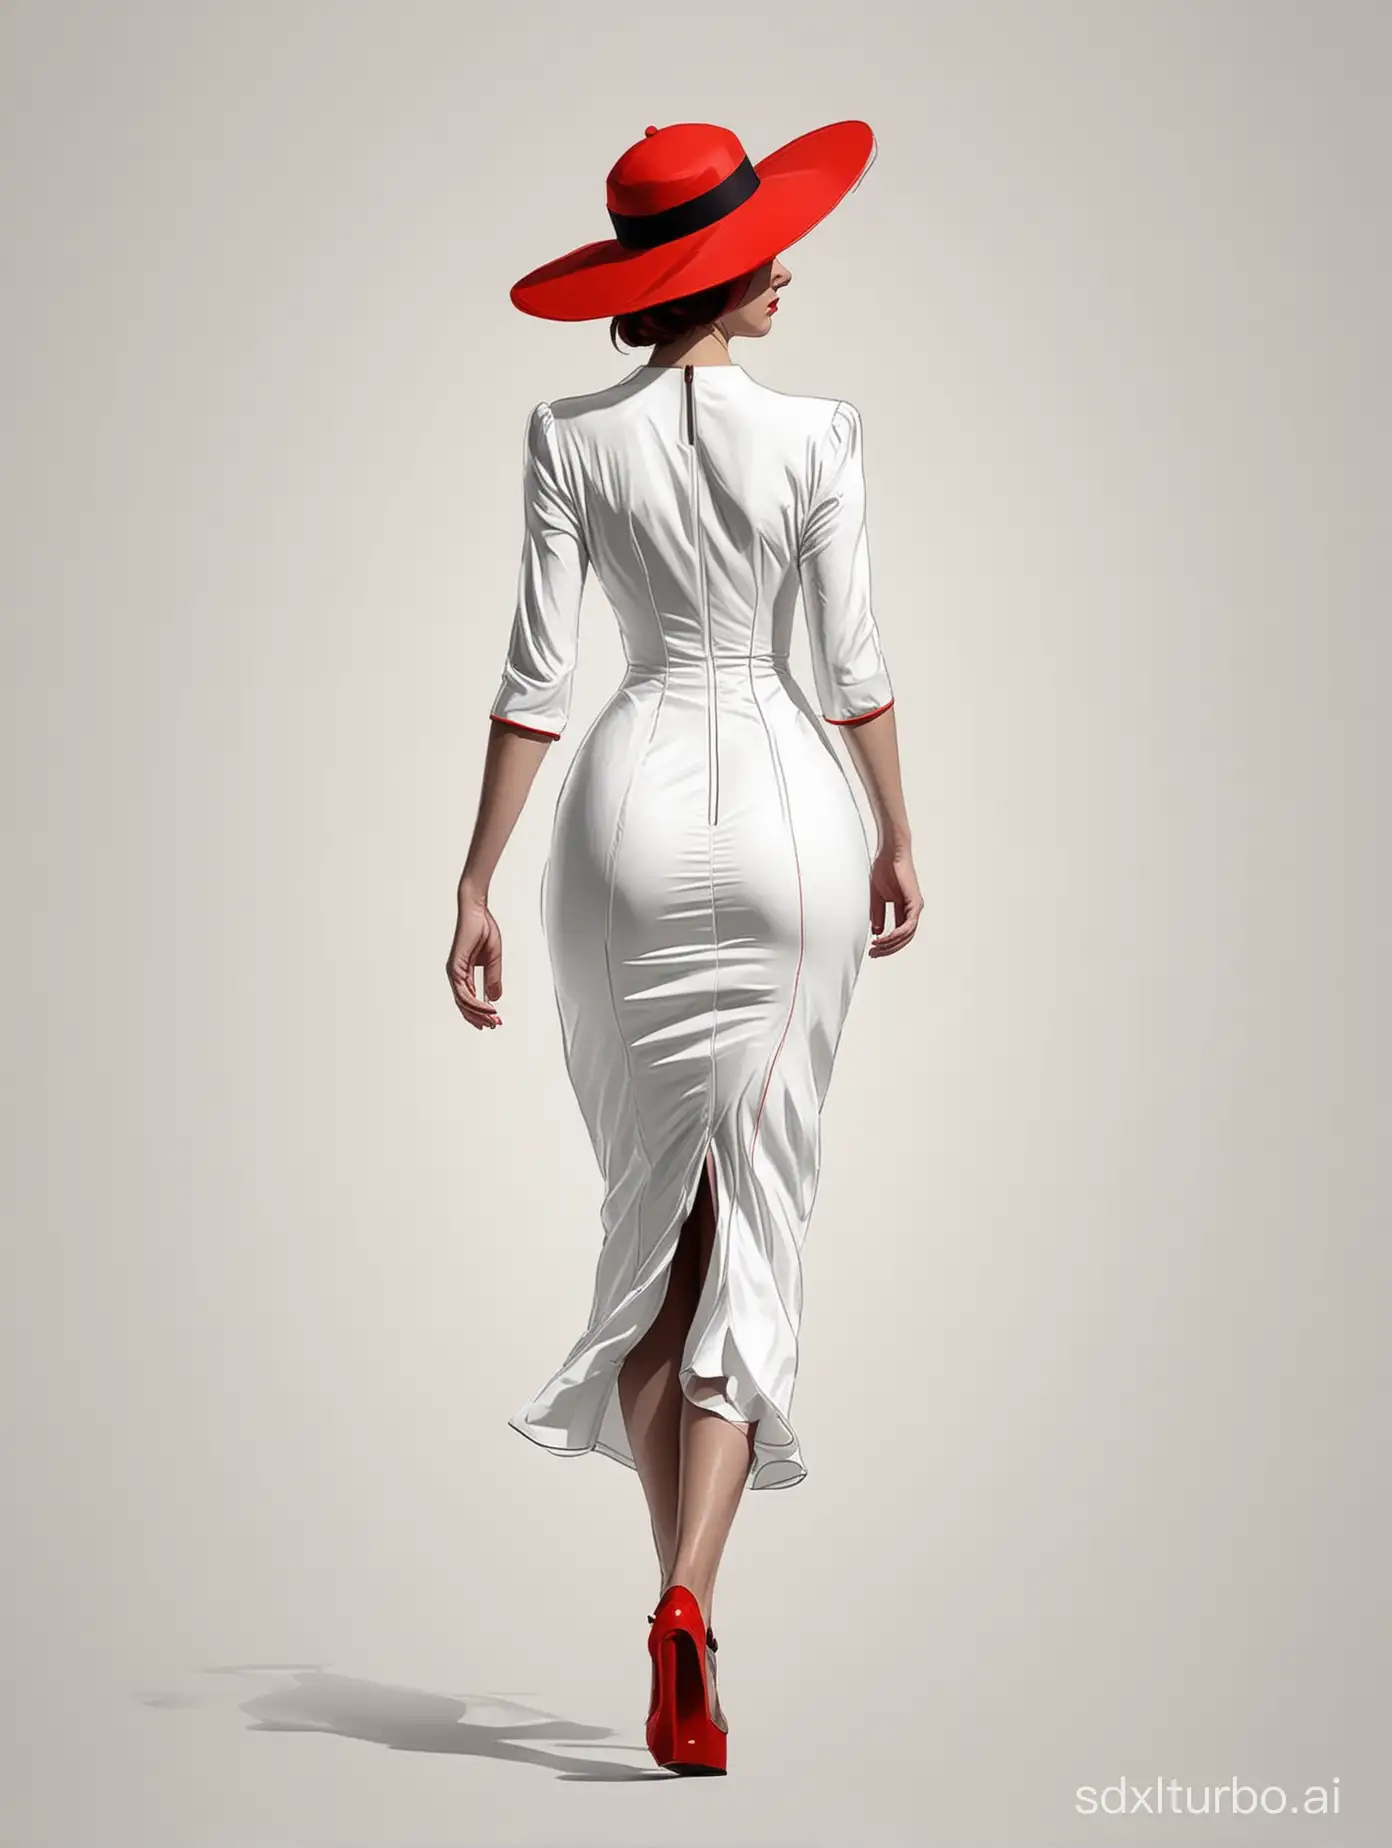 Elegant-Woman-in-White-Dress-and-Red-Hat-on-Runway